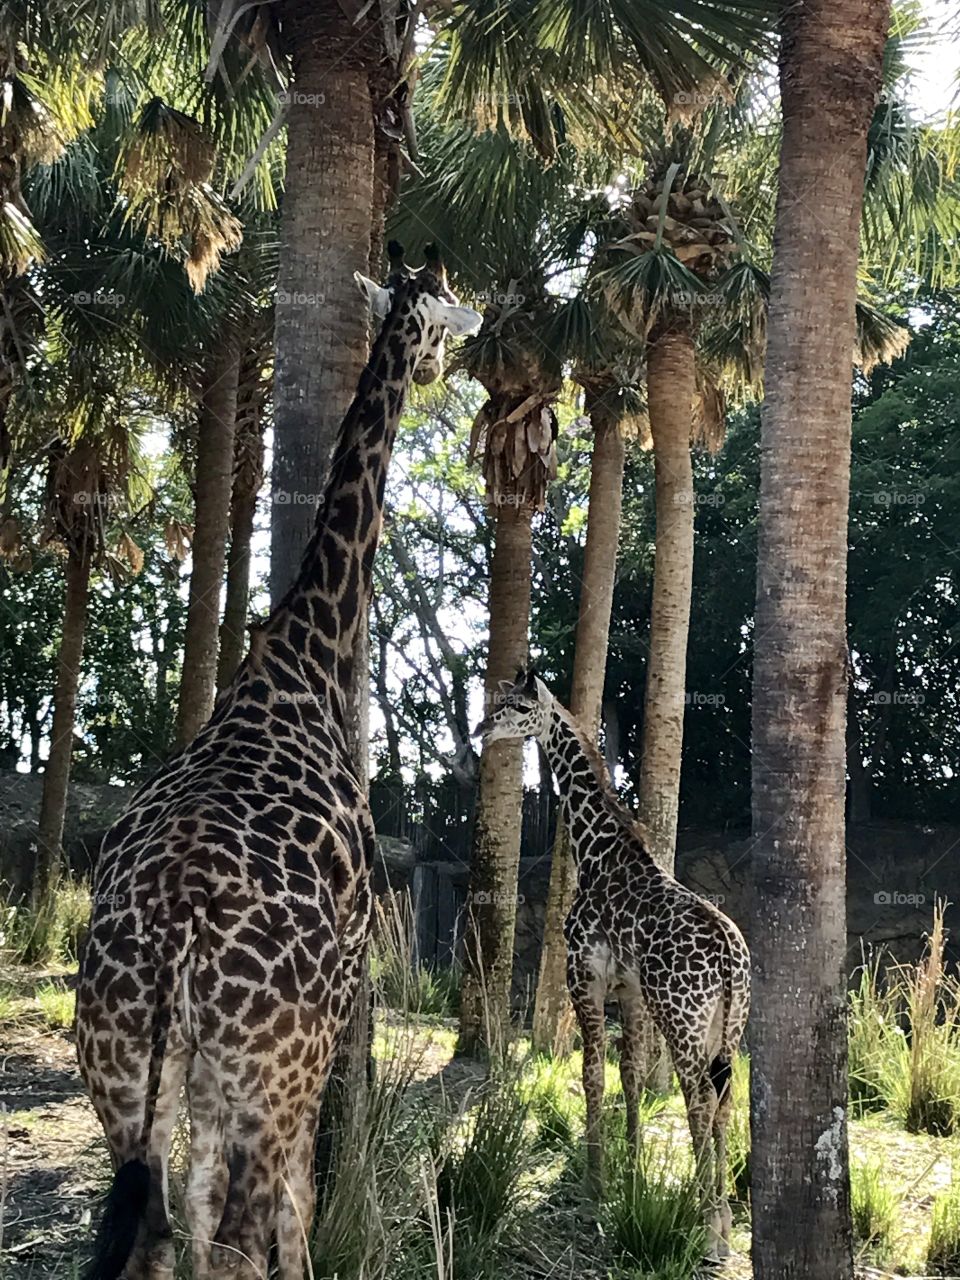 Two giraffes in forest